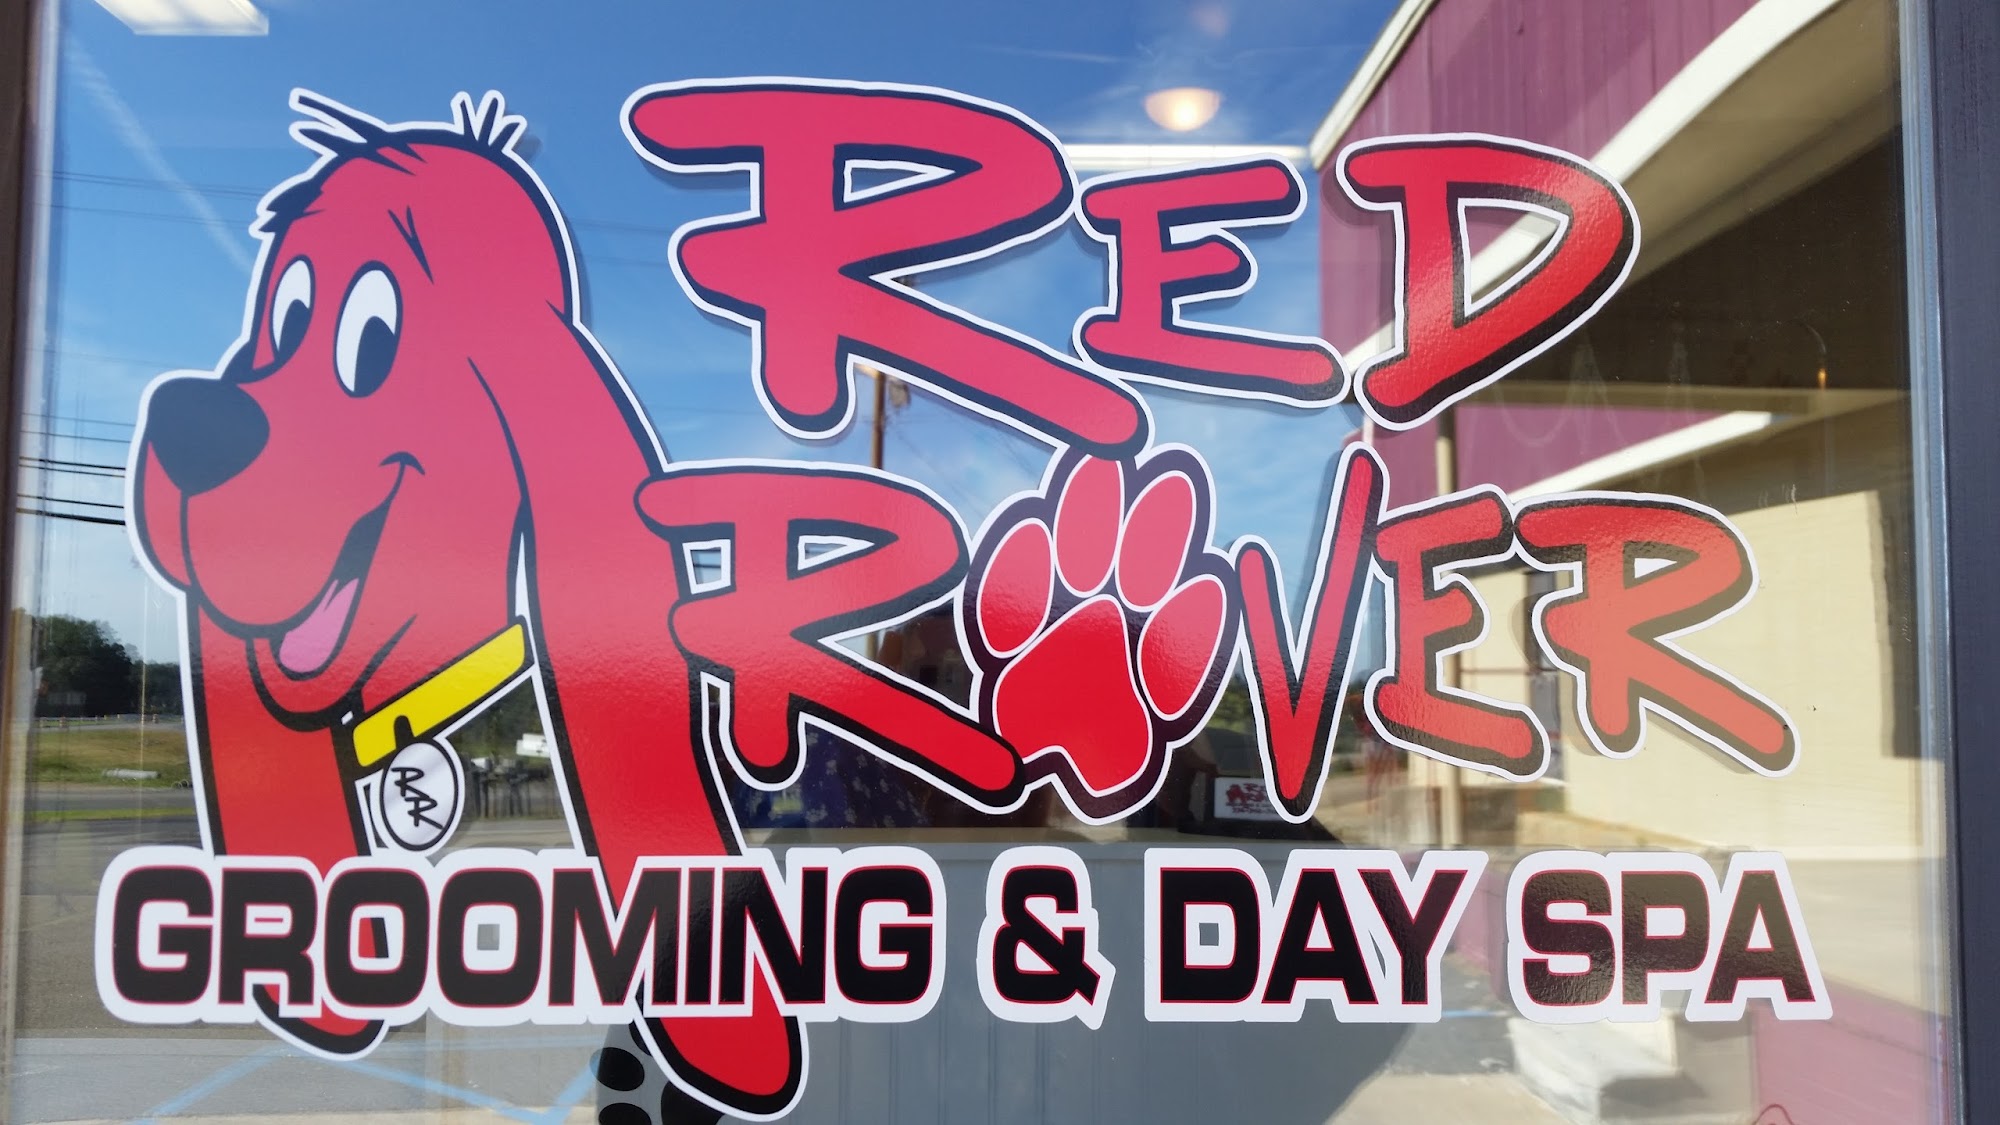 Red Rover Grooming & Day Spa, LLC